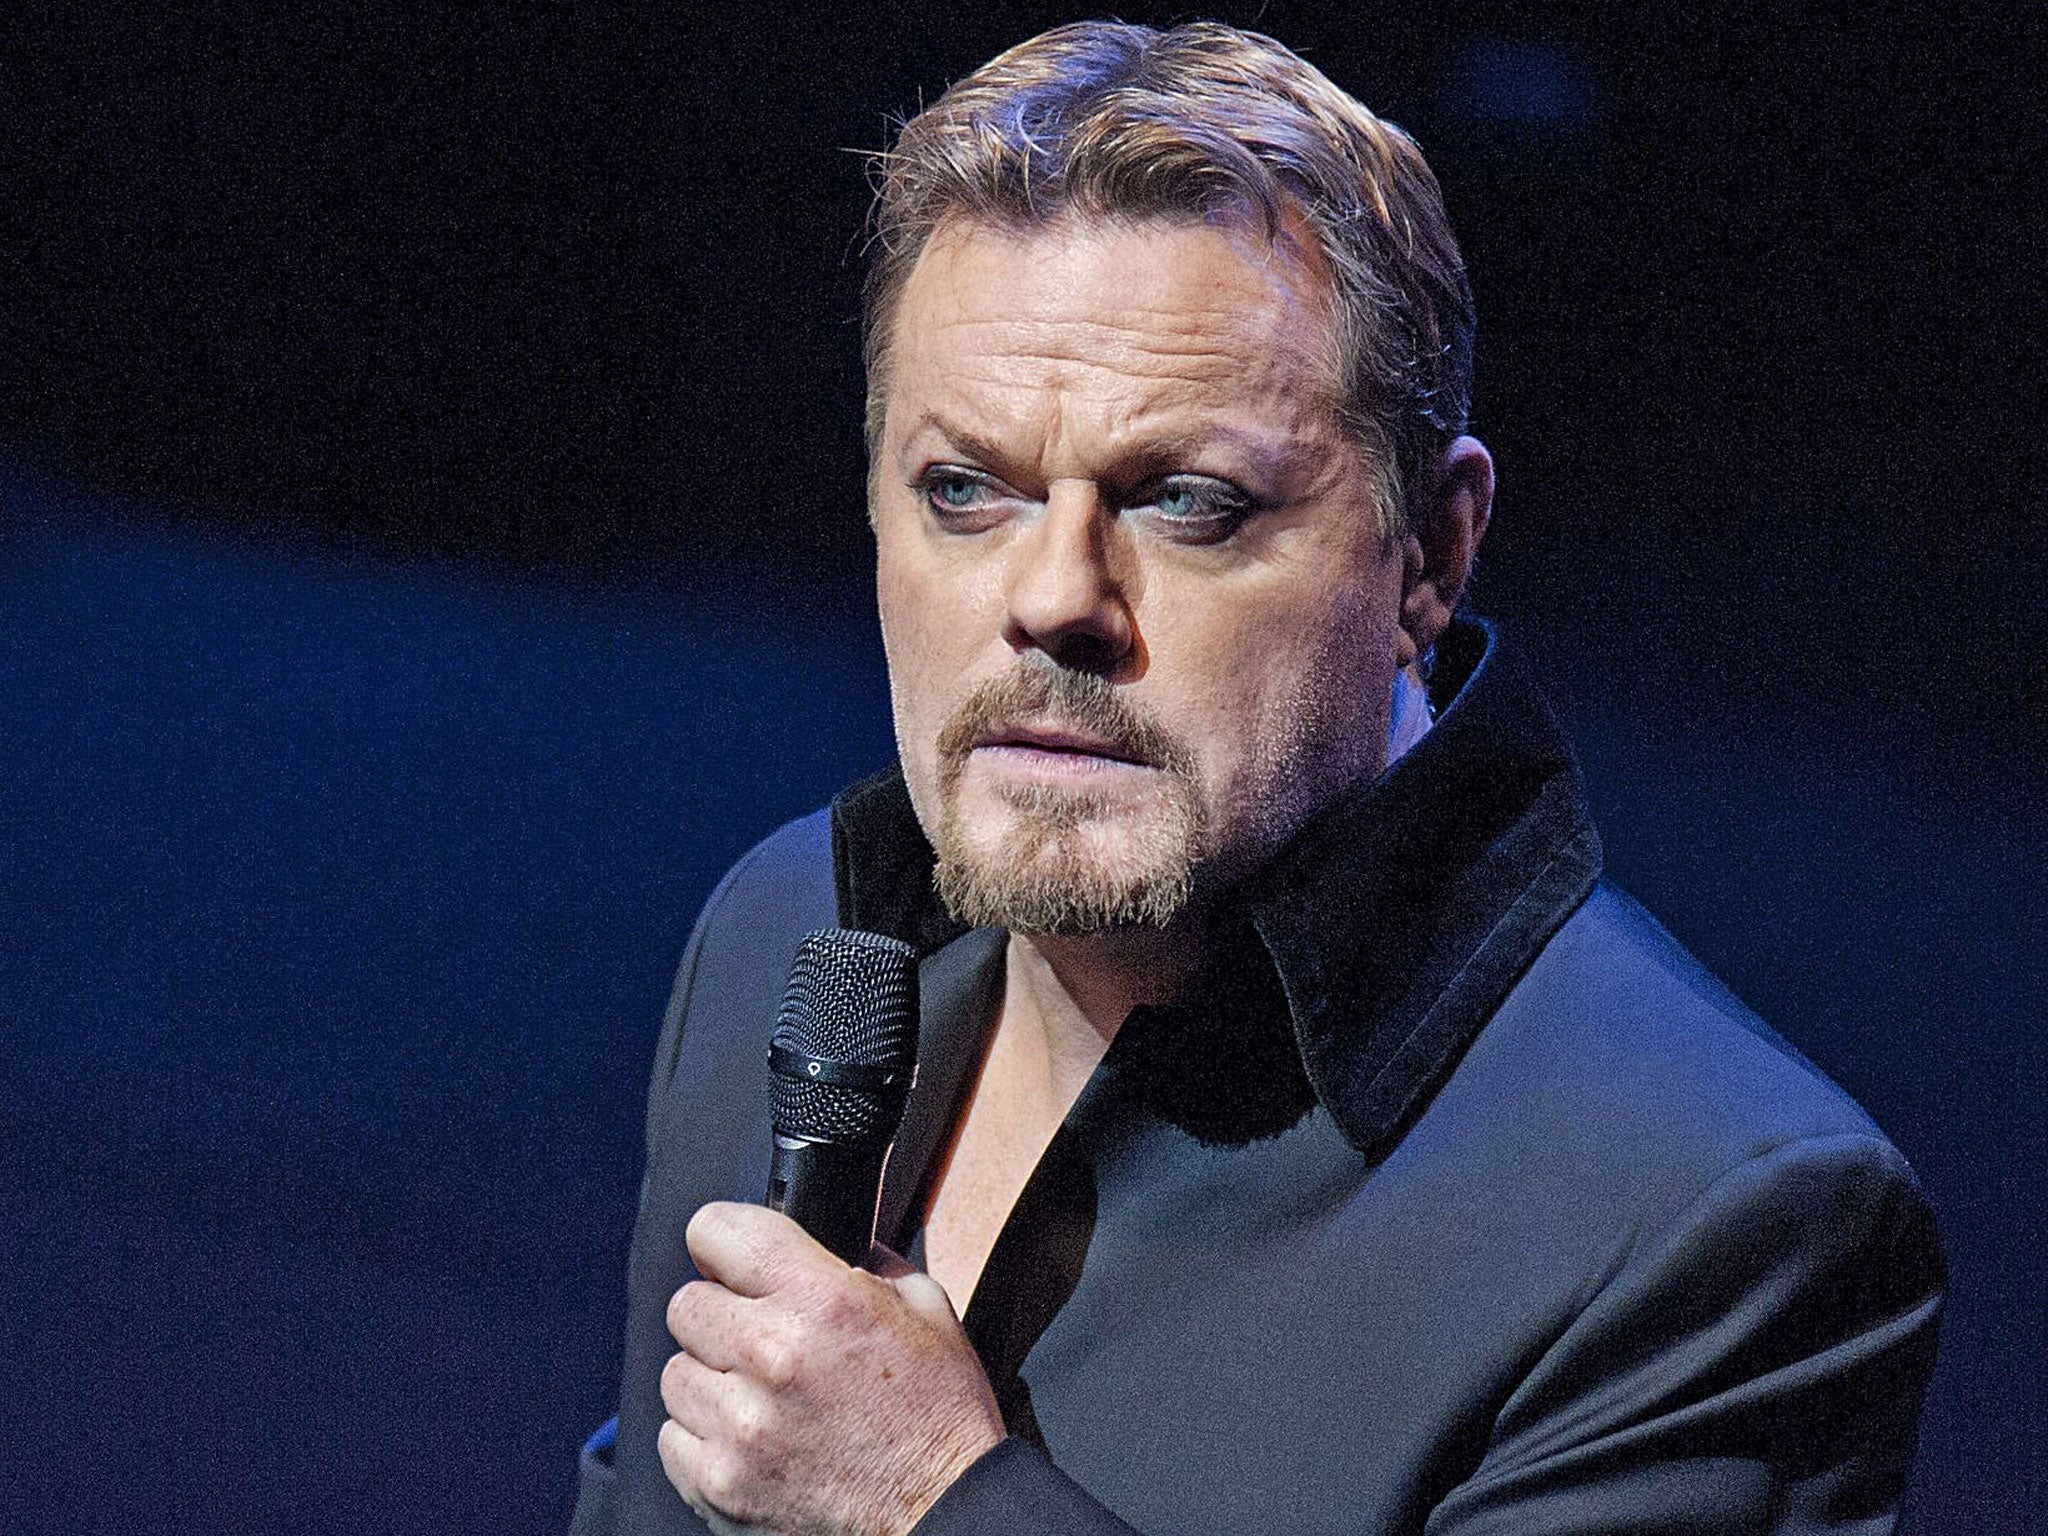 Euro star: Eddie Izzard performing his 'Force Majeure' show in German